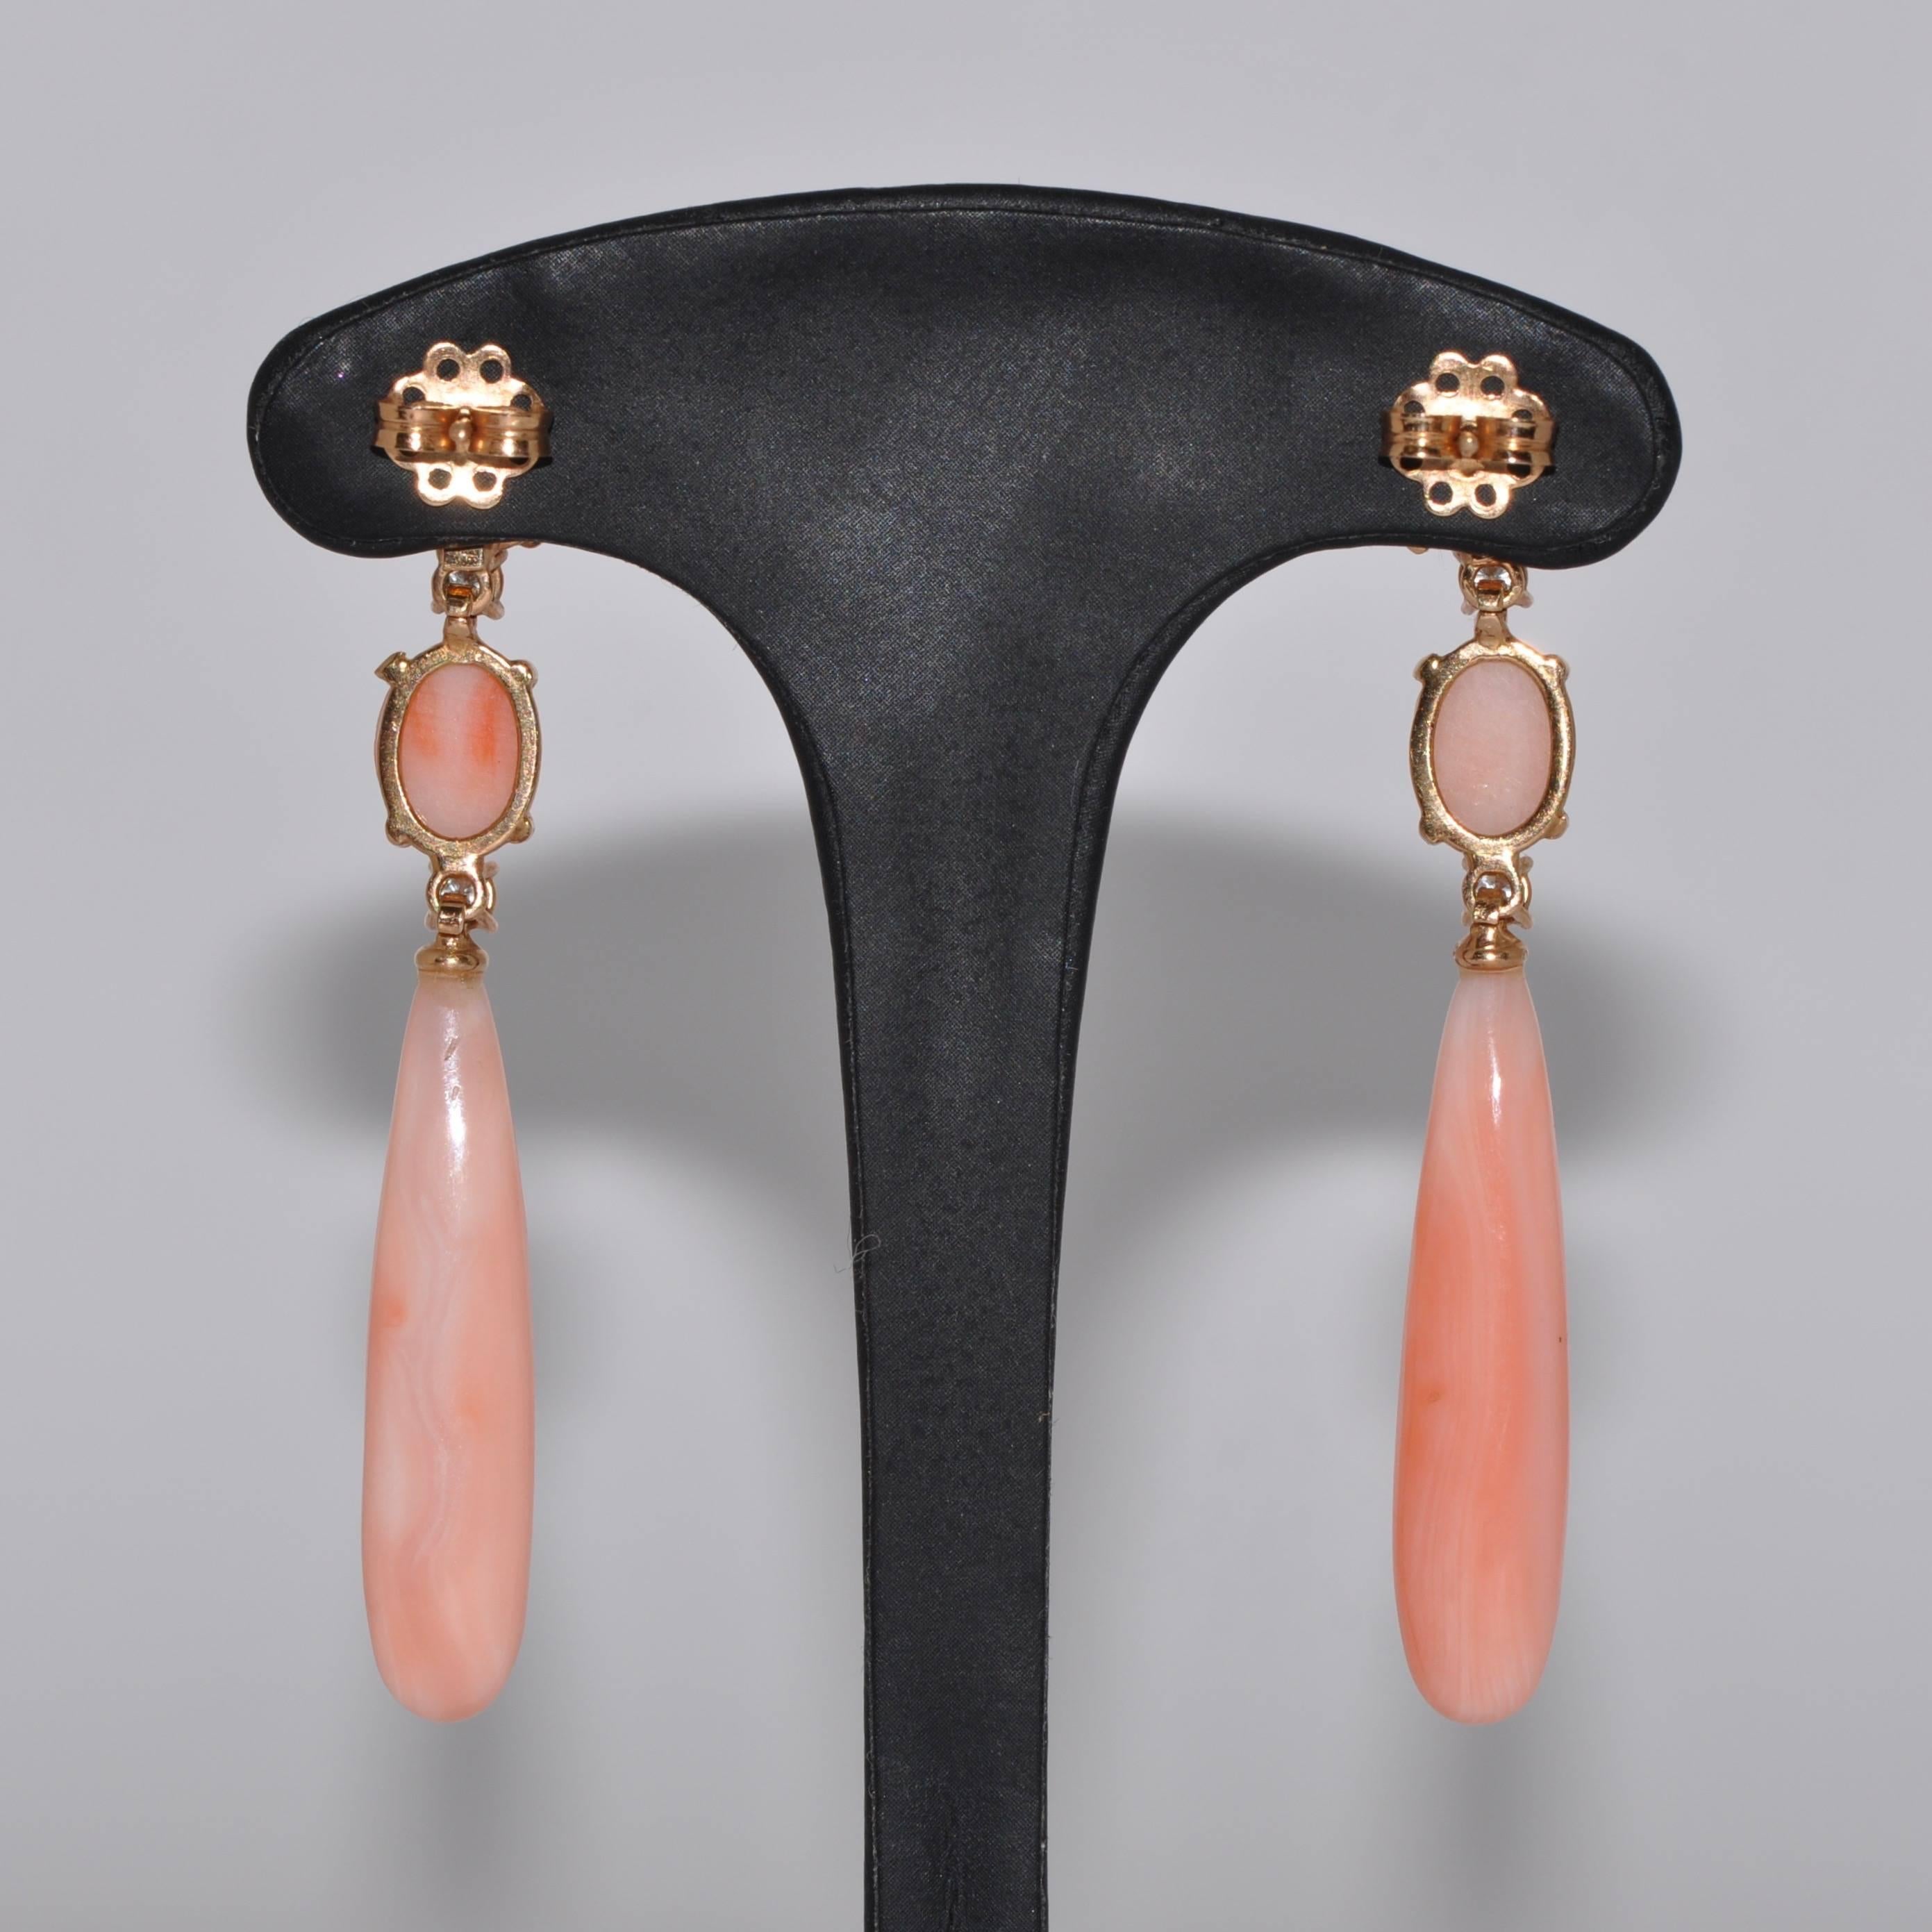 Chandelier Earrings Coral White Diamonds Yellow Gold 18 Karat In New Condition For Sale In Vannes, FR